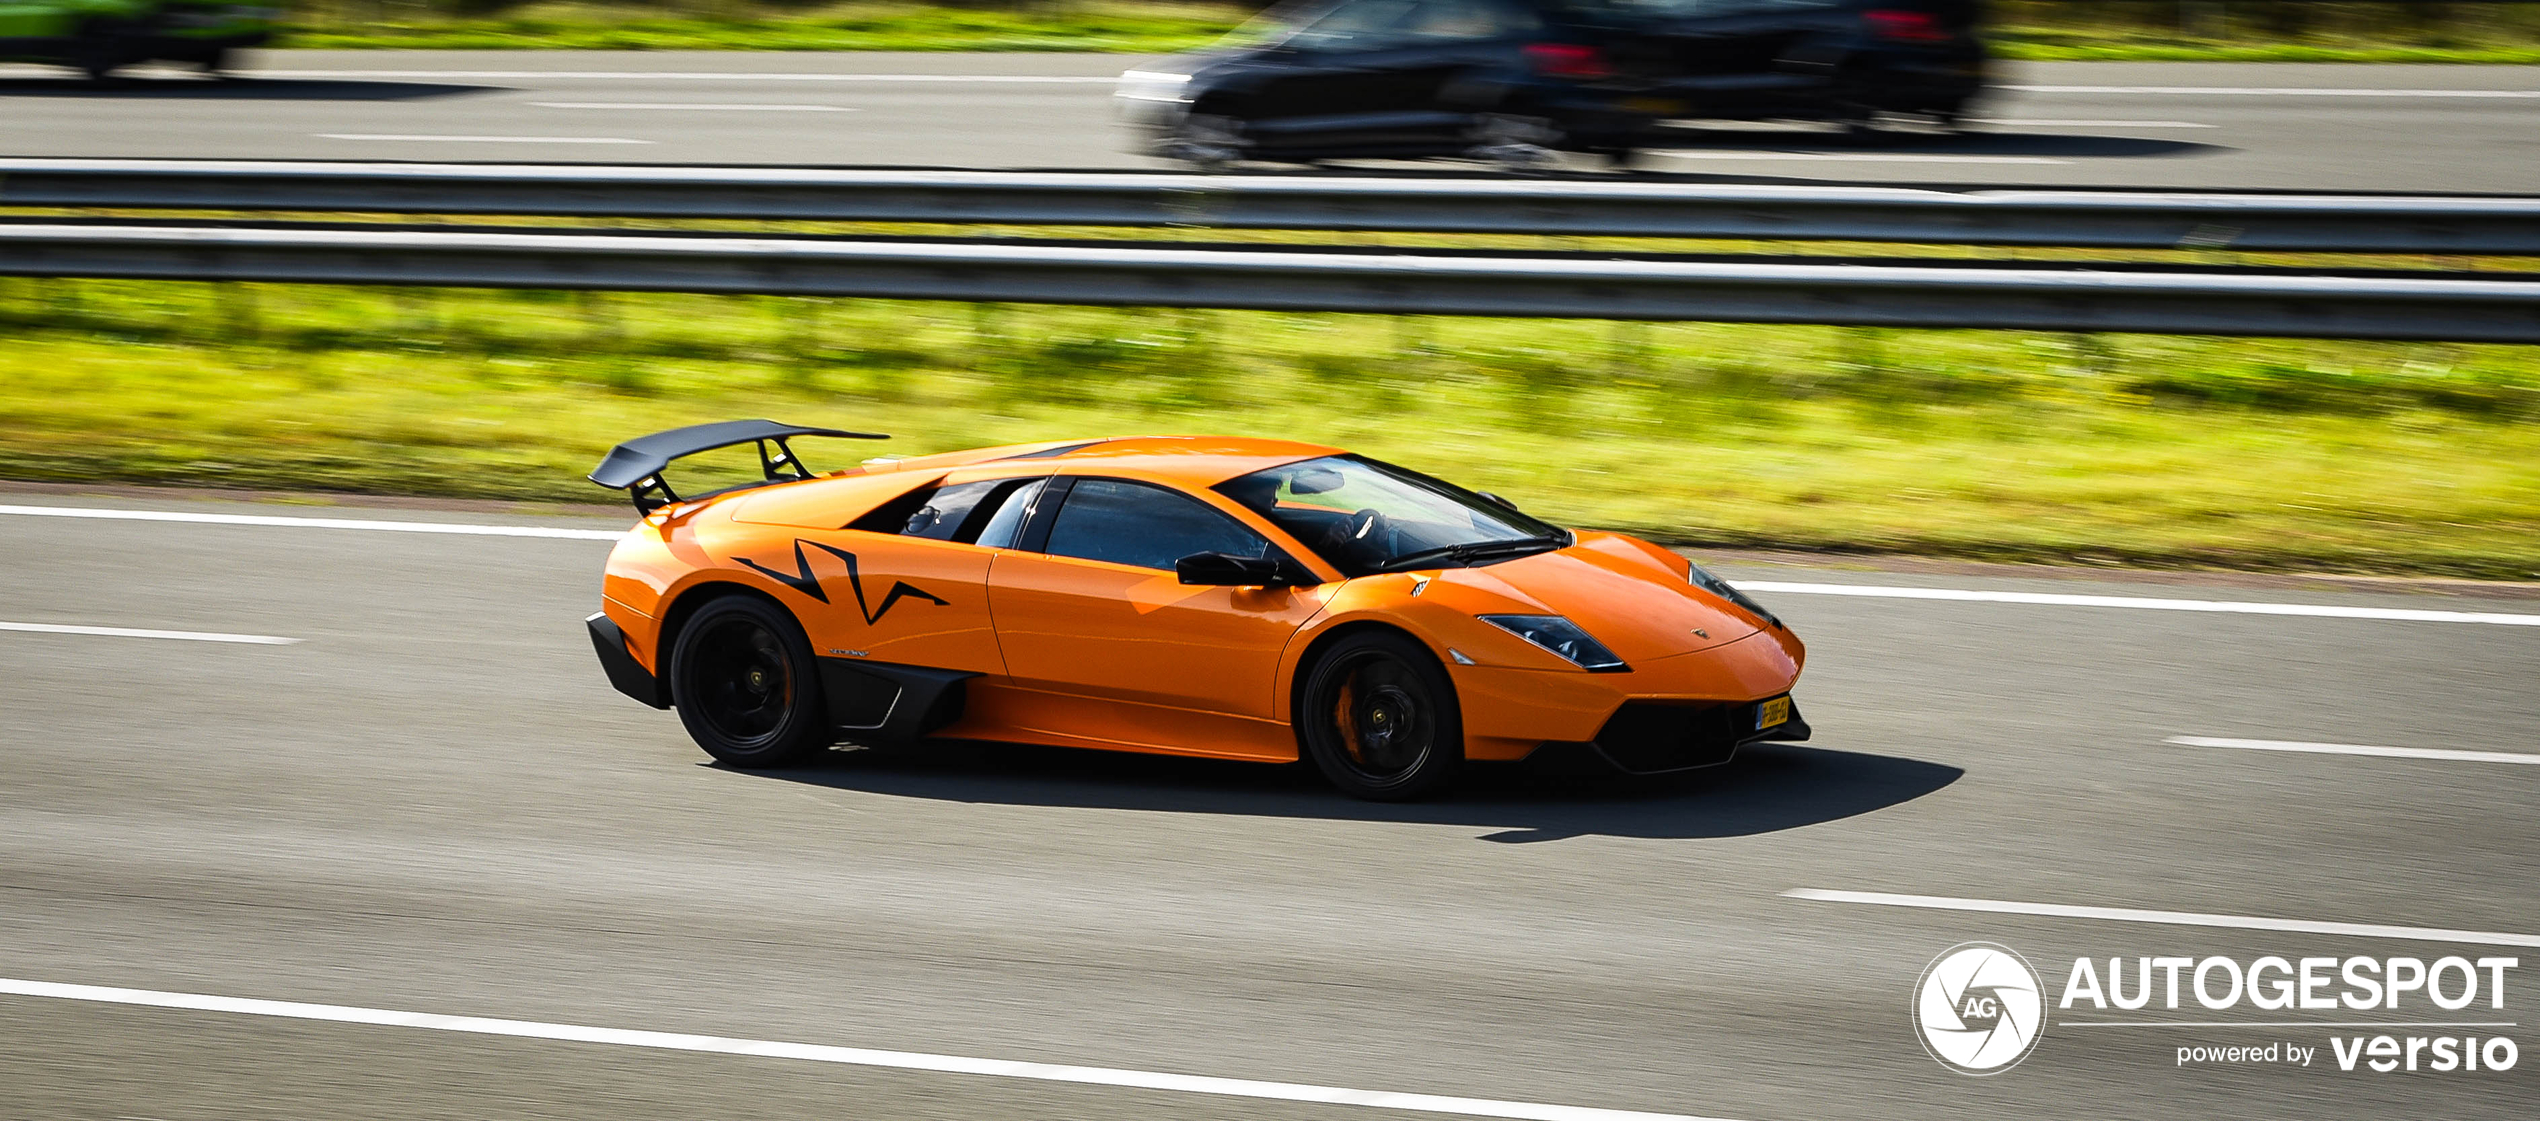 This Murciélago LP670-4 SuperVeloce Spotted on the Highway